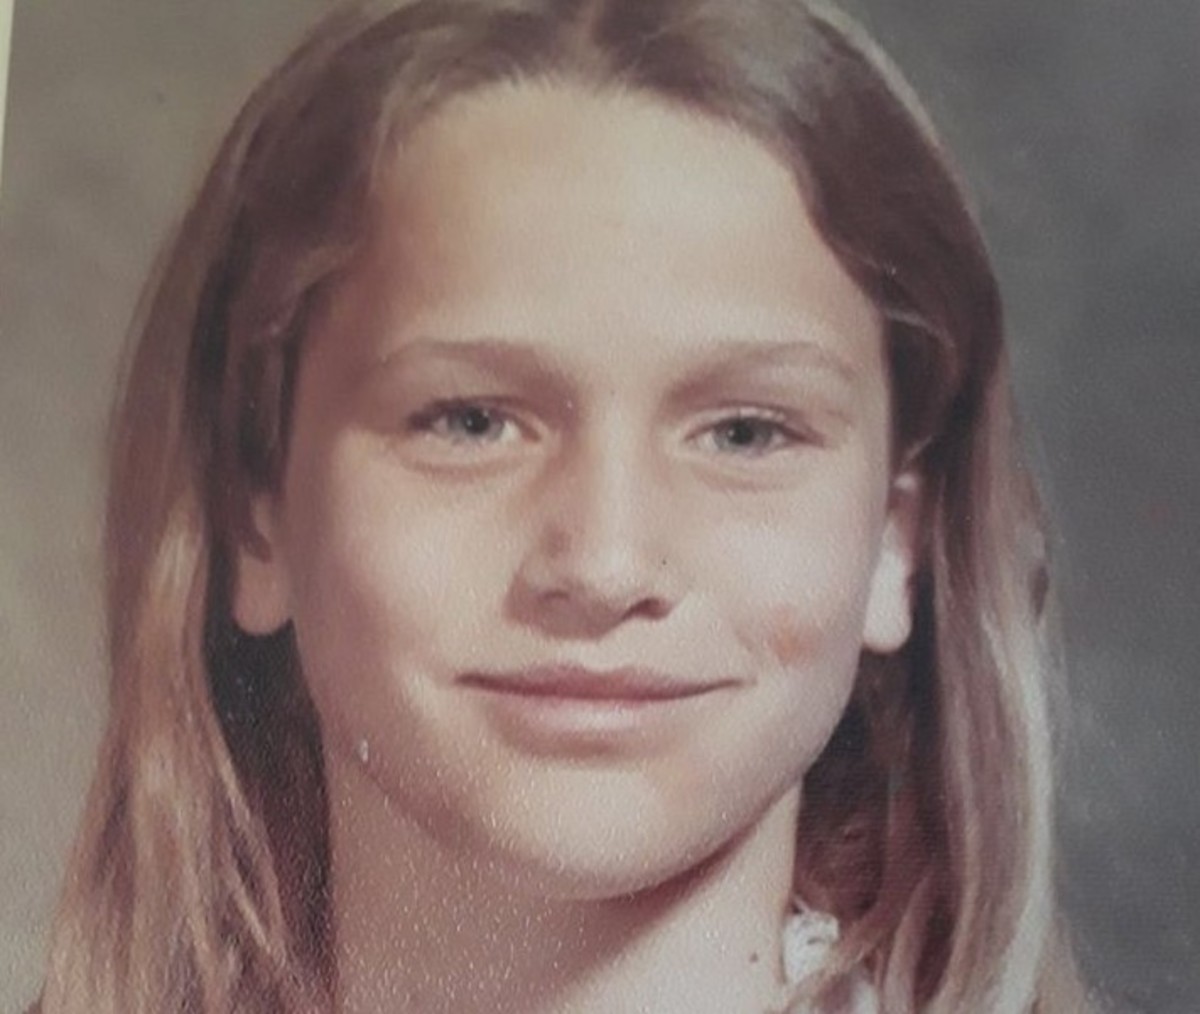 Linda Ann O’Keefe was a Girl Scout who vanished in 1973, on her way home from school in Newport Beach, California. Photo courtesy of NCMA.